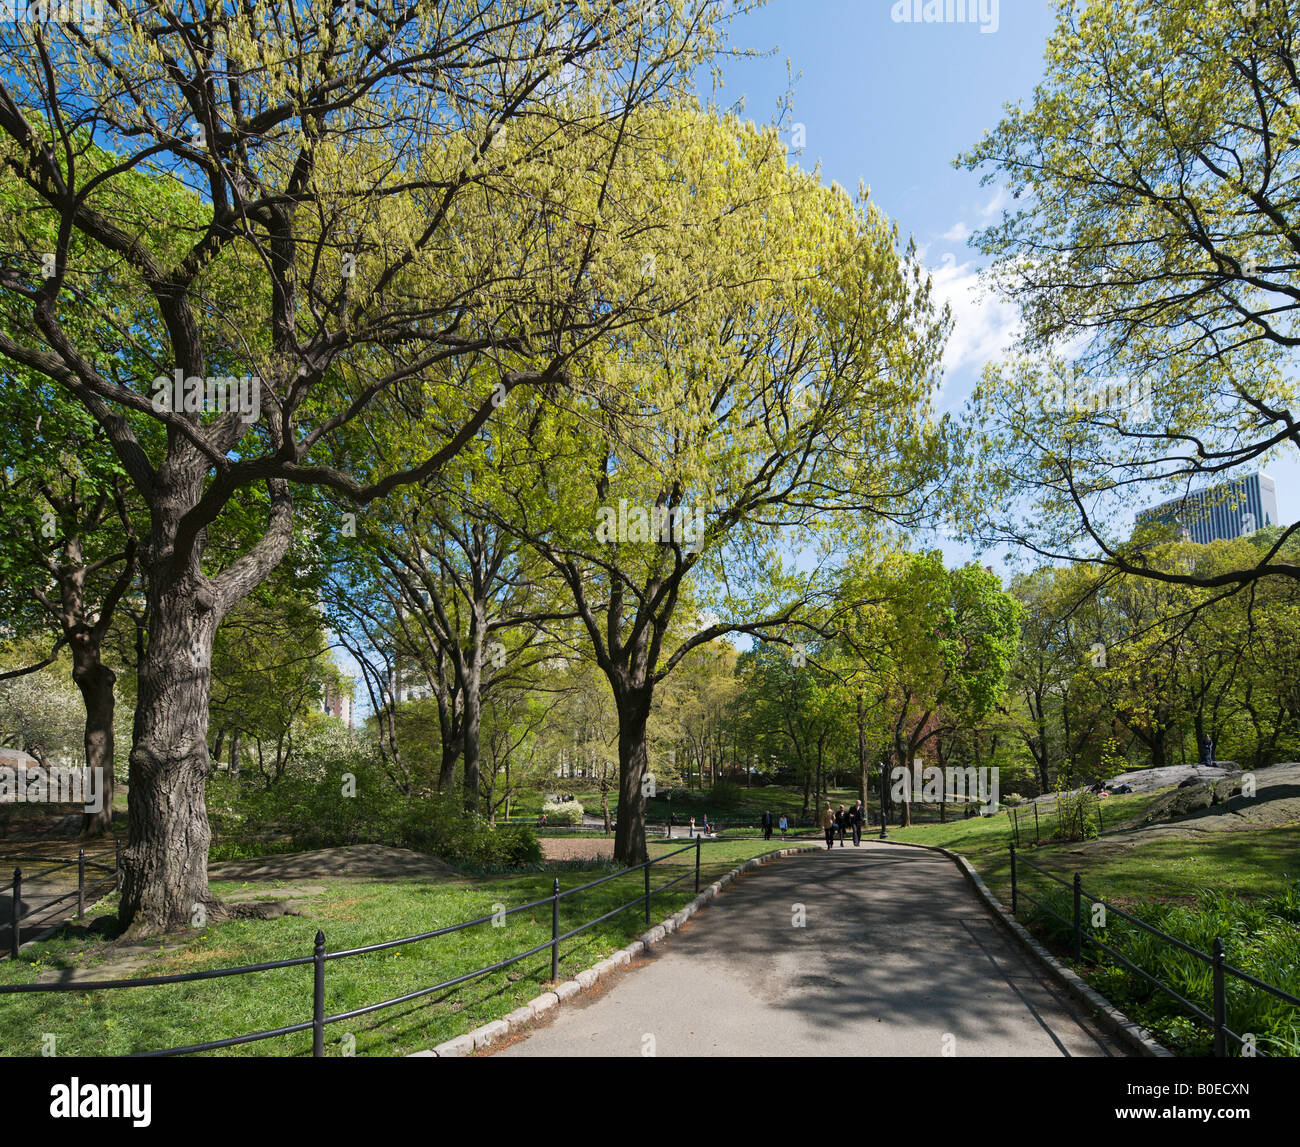 South East of Central Park near the Zoo, Manhattan, New York City Stock Photo